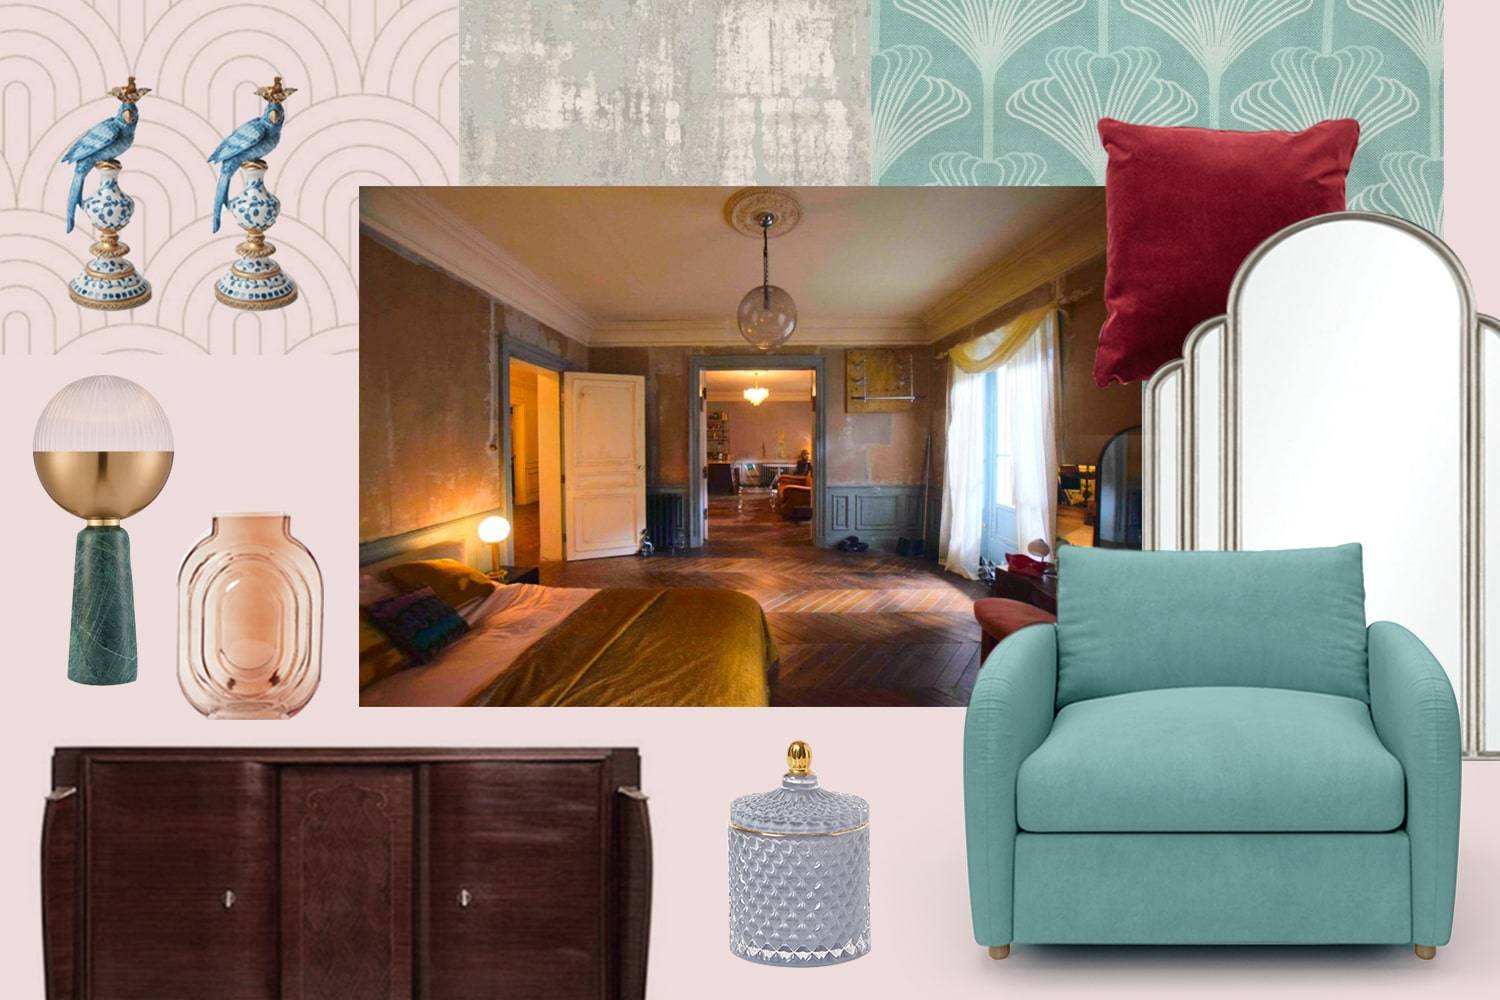 mood board of villanelle's paris apartment with a soft teal blue sofa